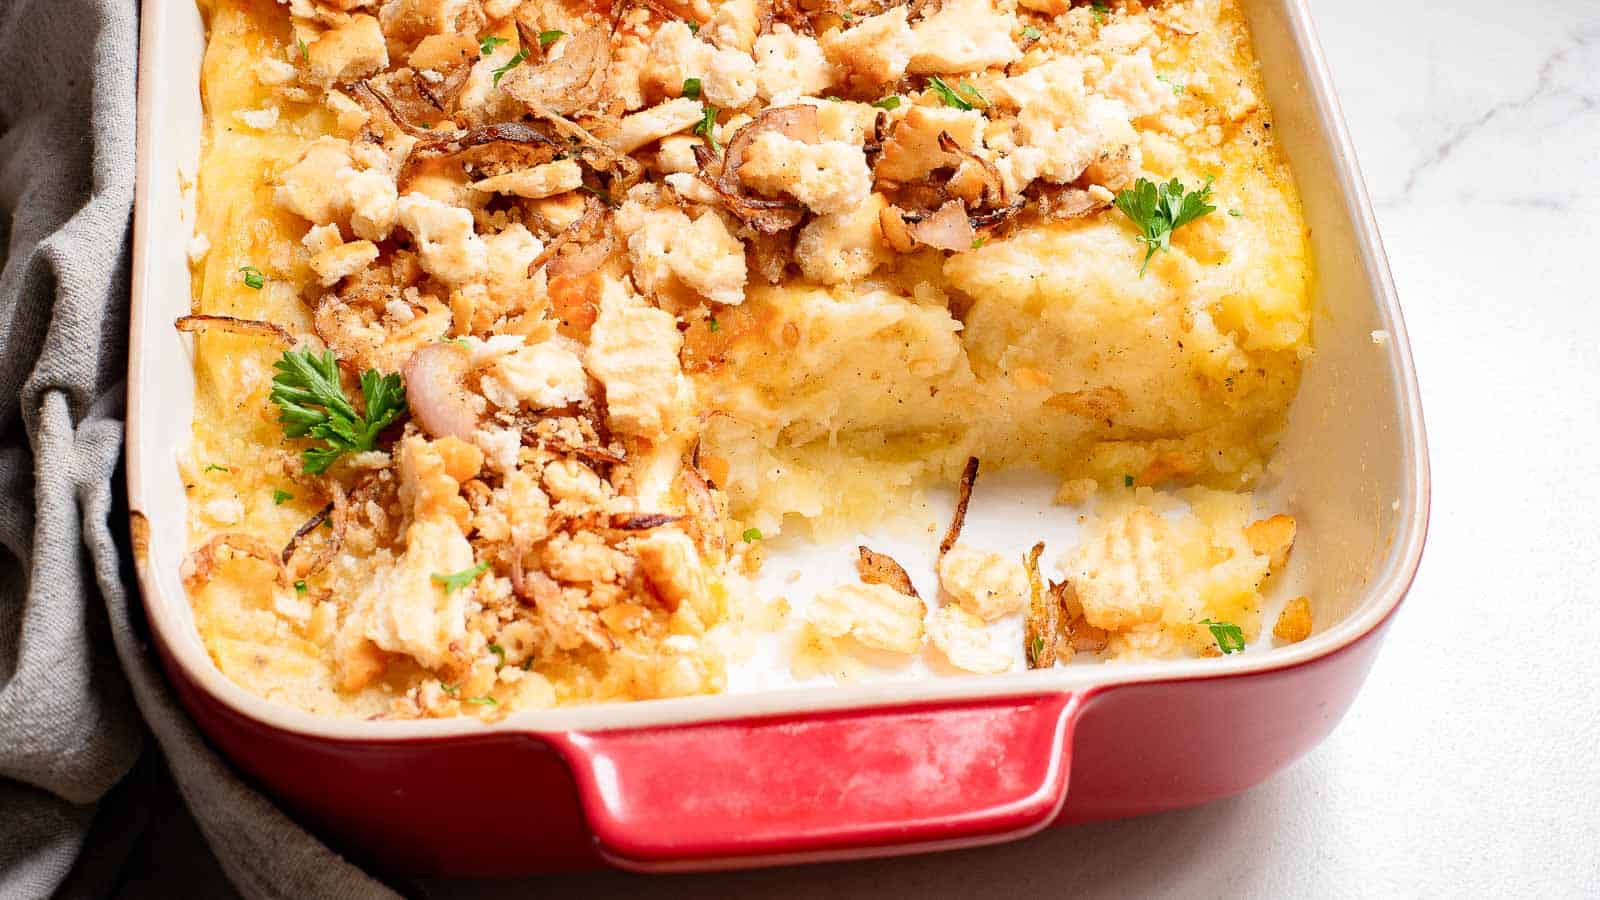 Masshed potato casserole in a baking dish with a cracker crumb topping.